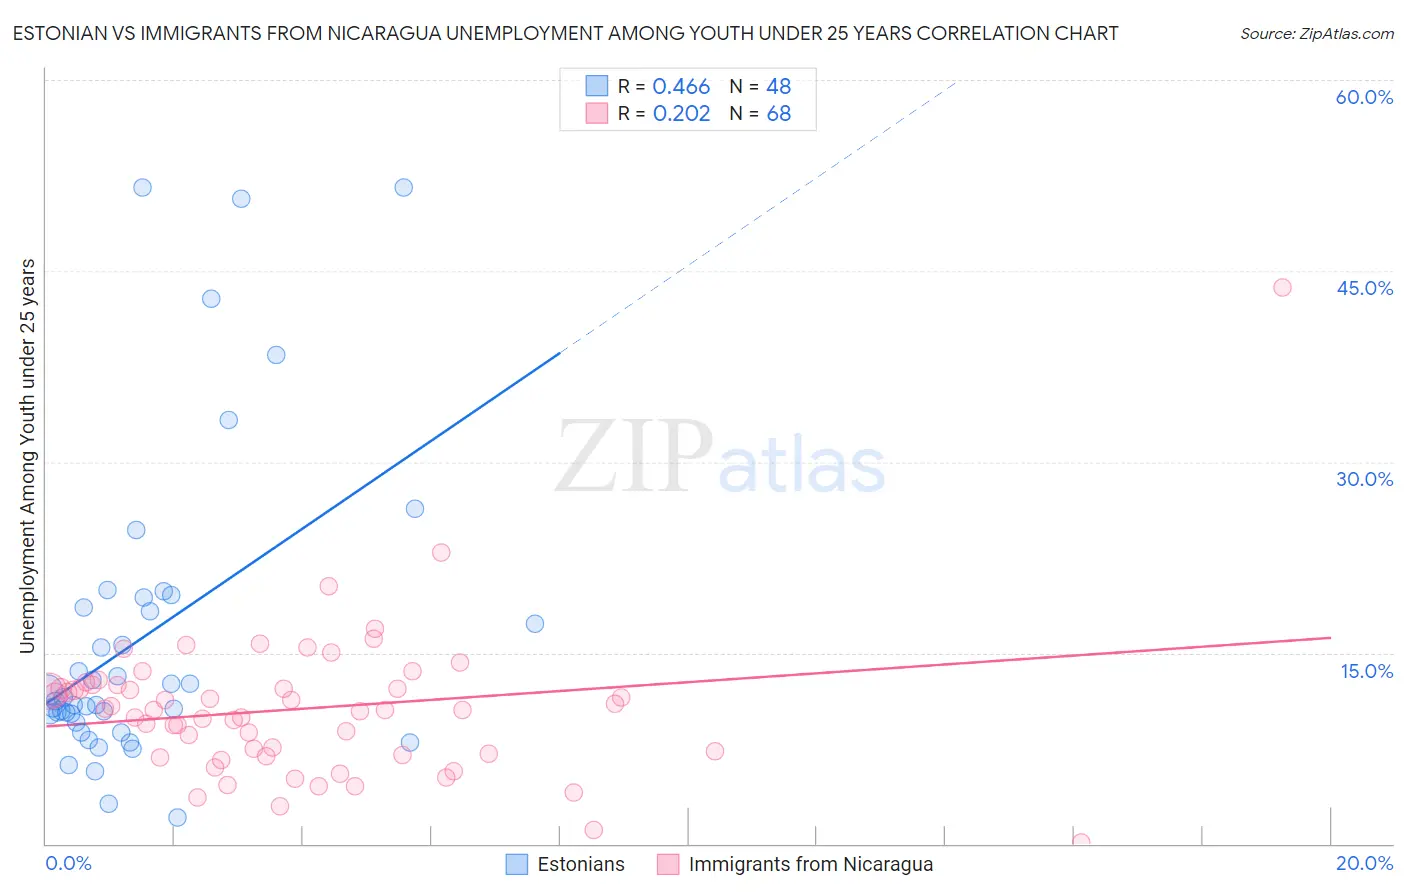 Estonian vs Immigrants from Nicaragua Unemployment Among Youth under 25 years